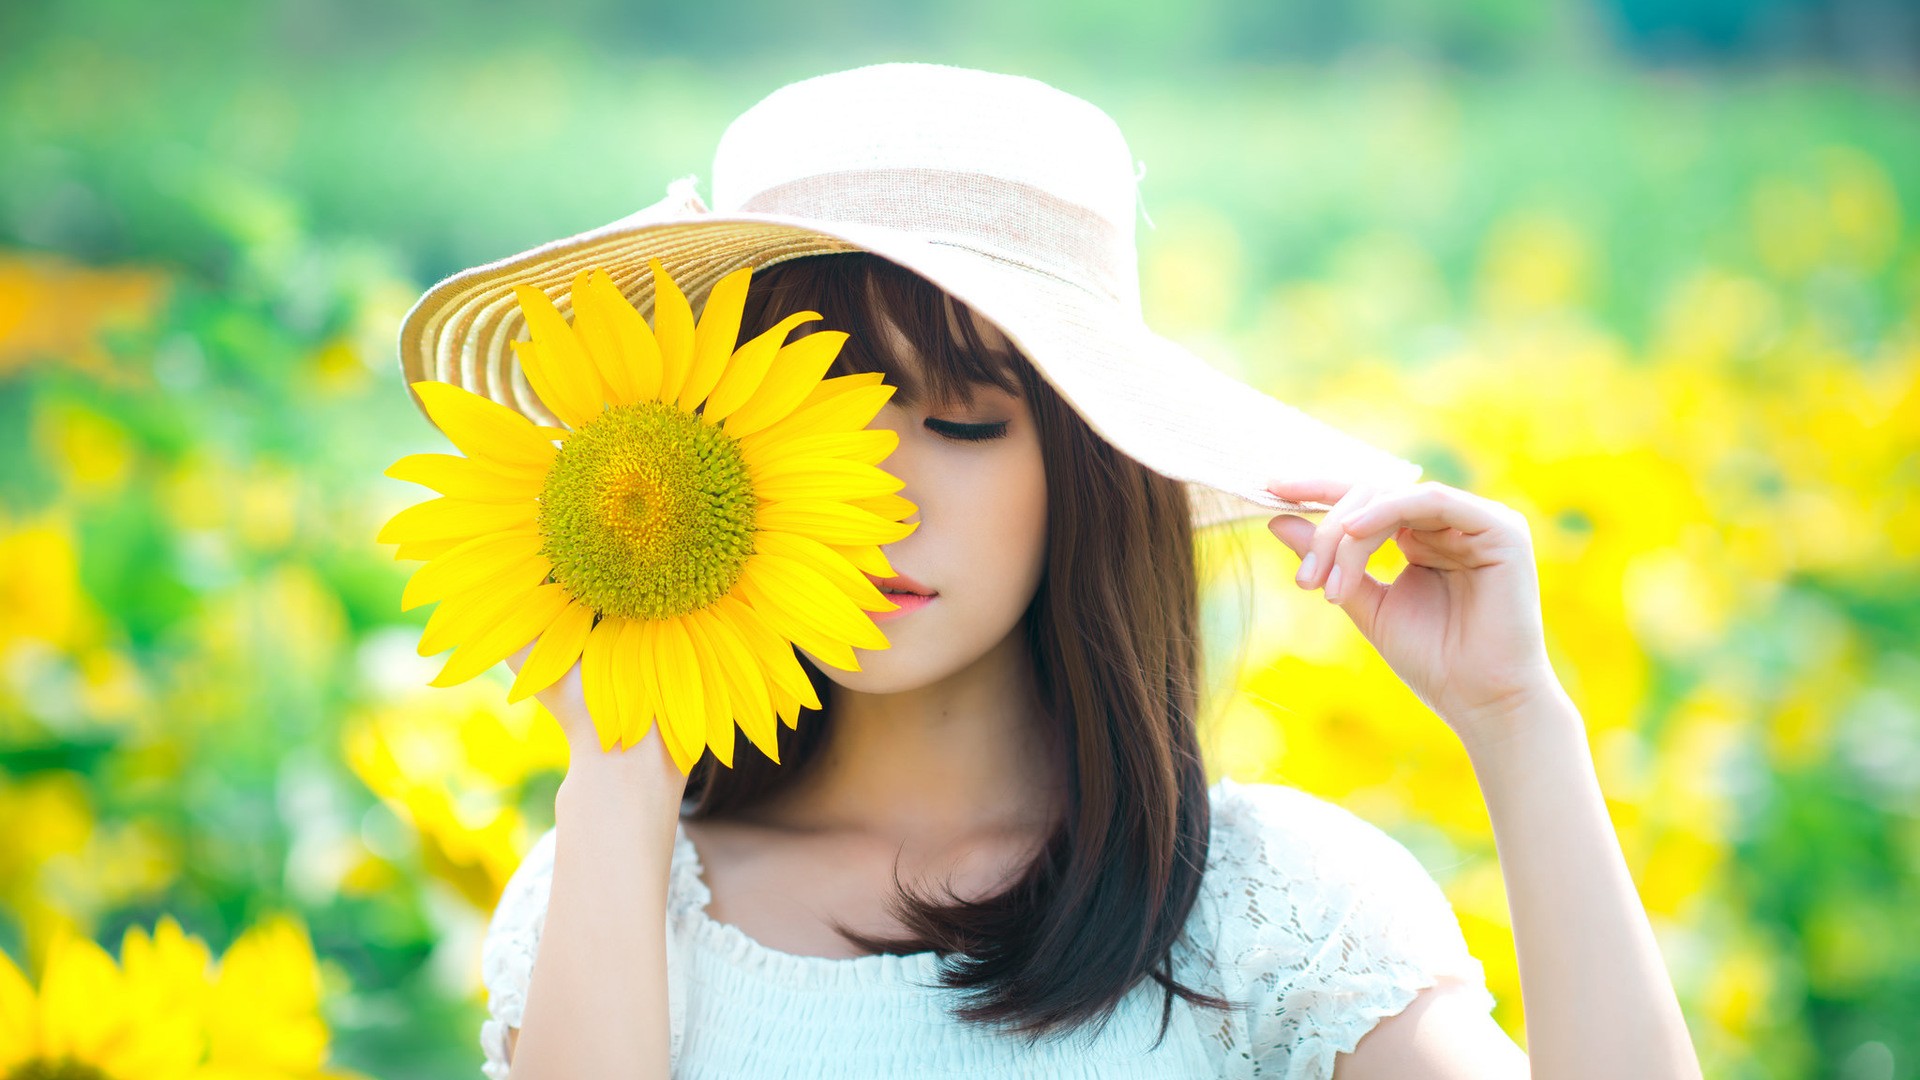 People 1920x1080 women model brunette long hair women outdoors depth of field Asian nature flowers sunflowers yellow flowers hat closed eyes white tops face millinery plants white clothing pale makeup women with hats